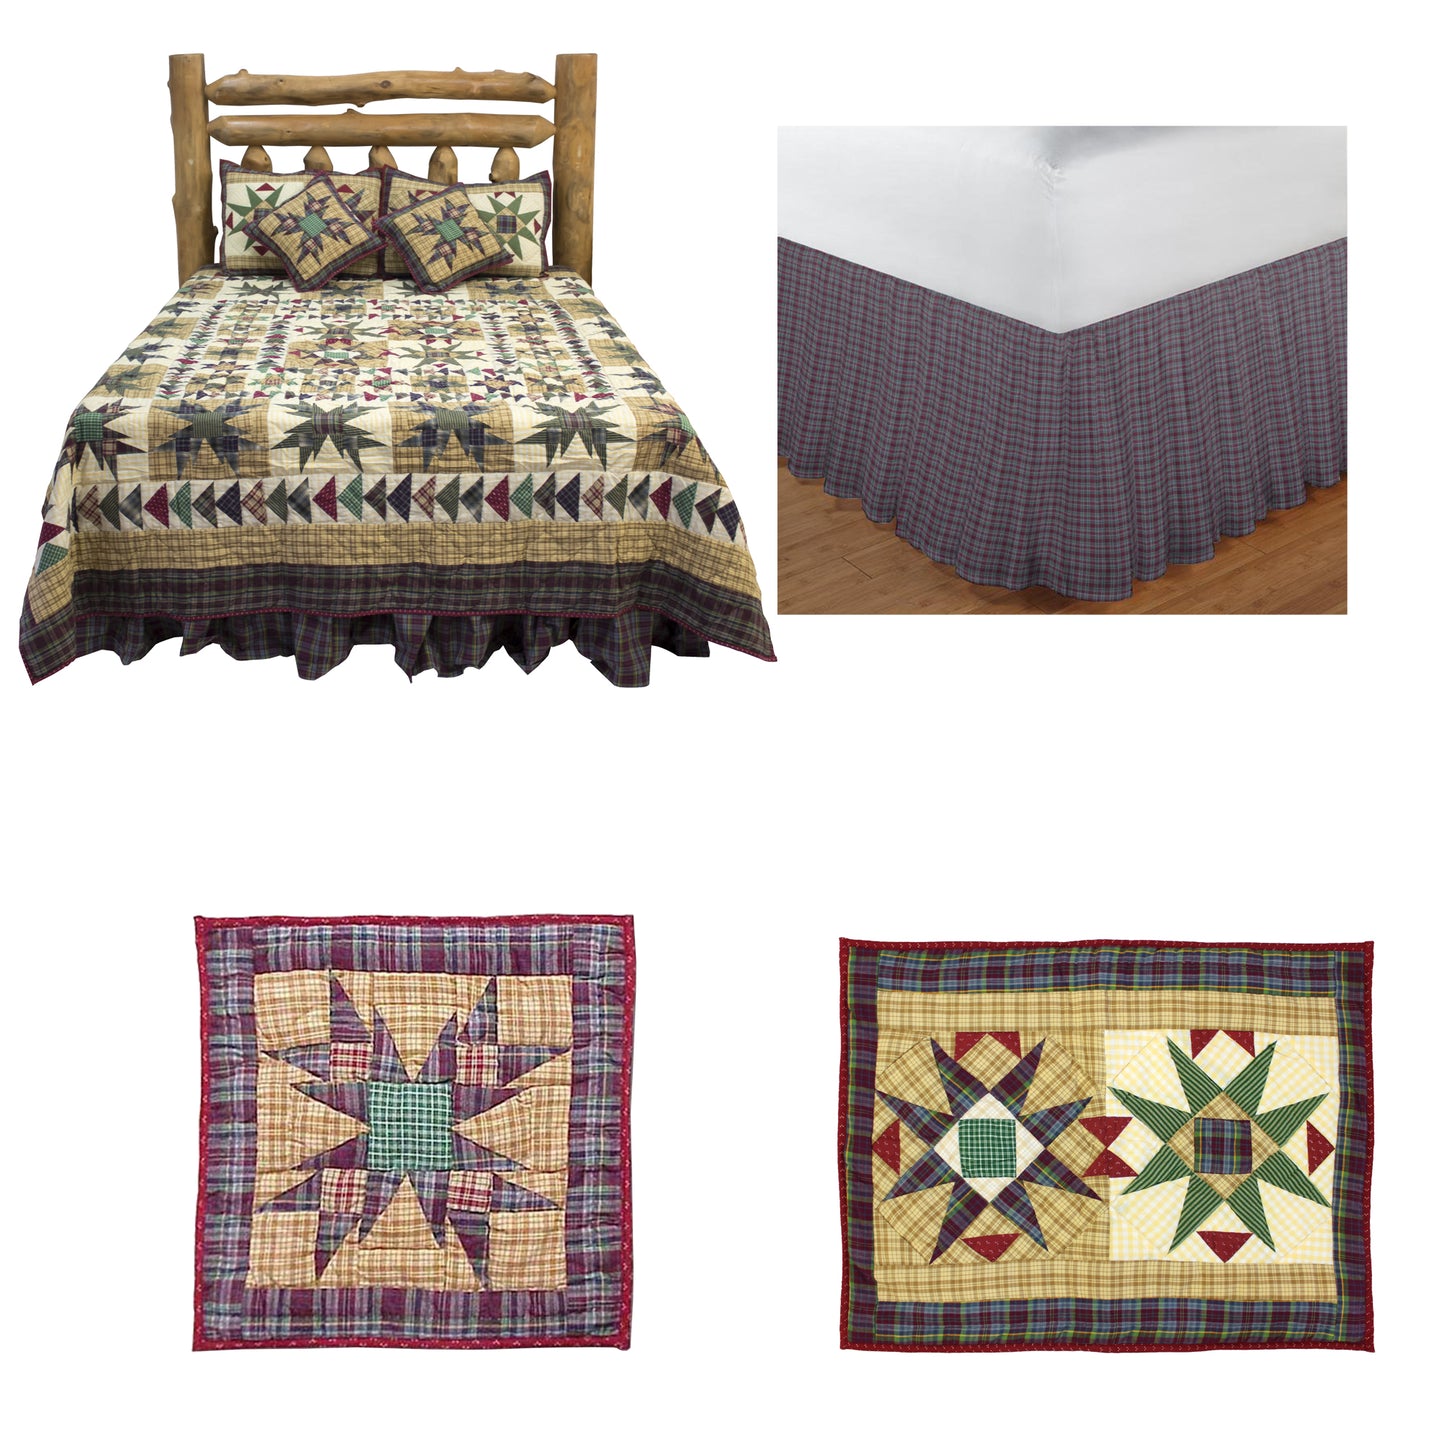 Blazing Stars Bedding accessories and Ensemble sets.